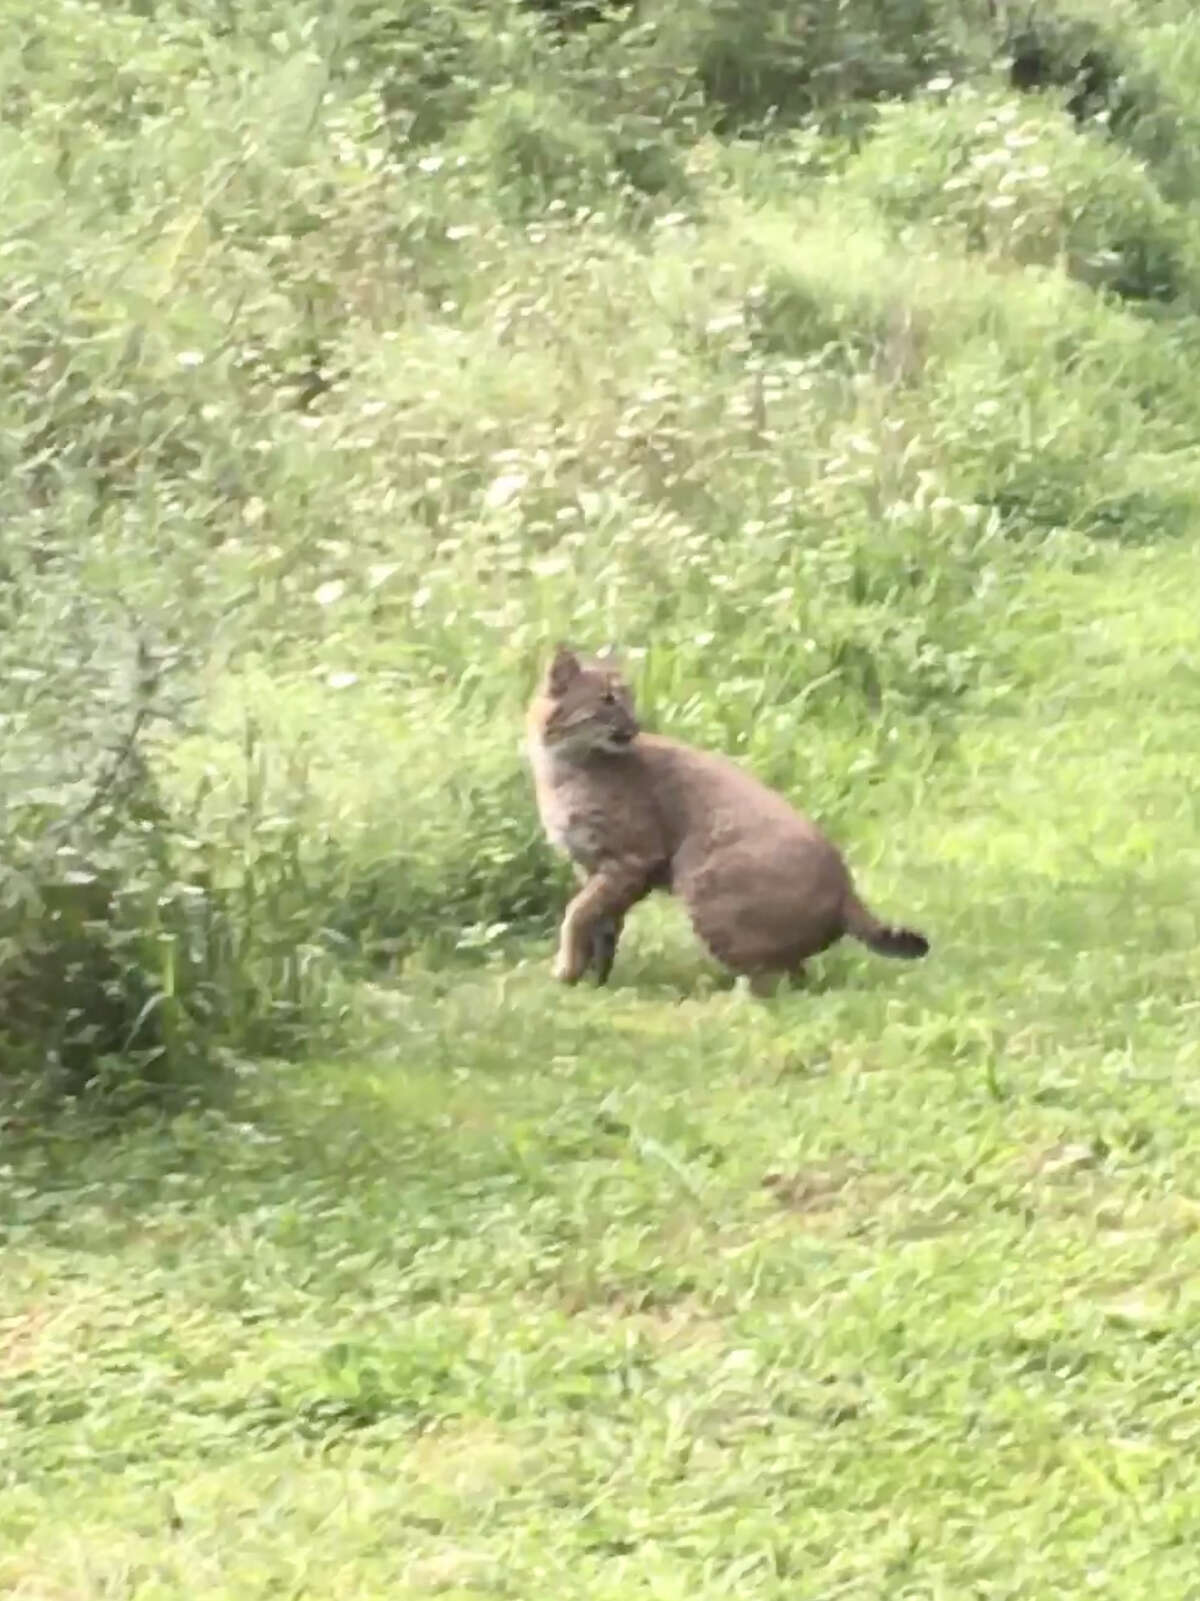 A bobcat was spotted in a Westport backyard on August 27th, 2018.